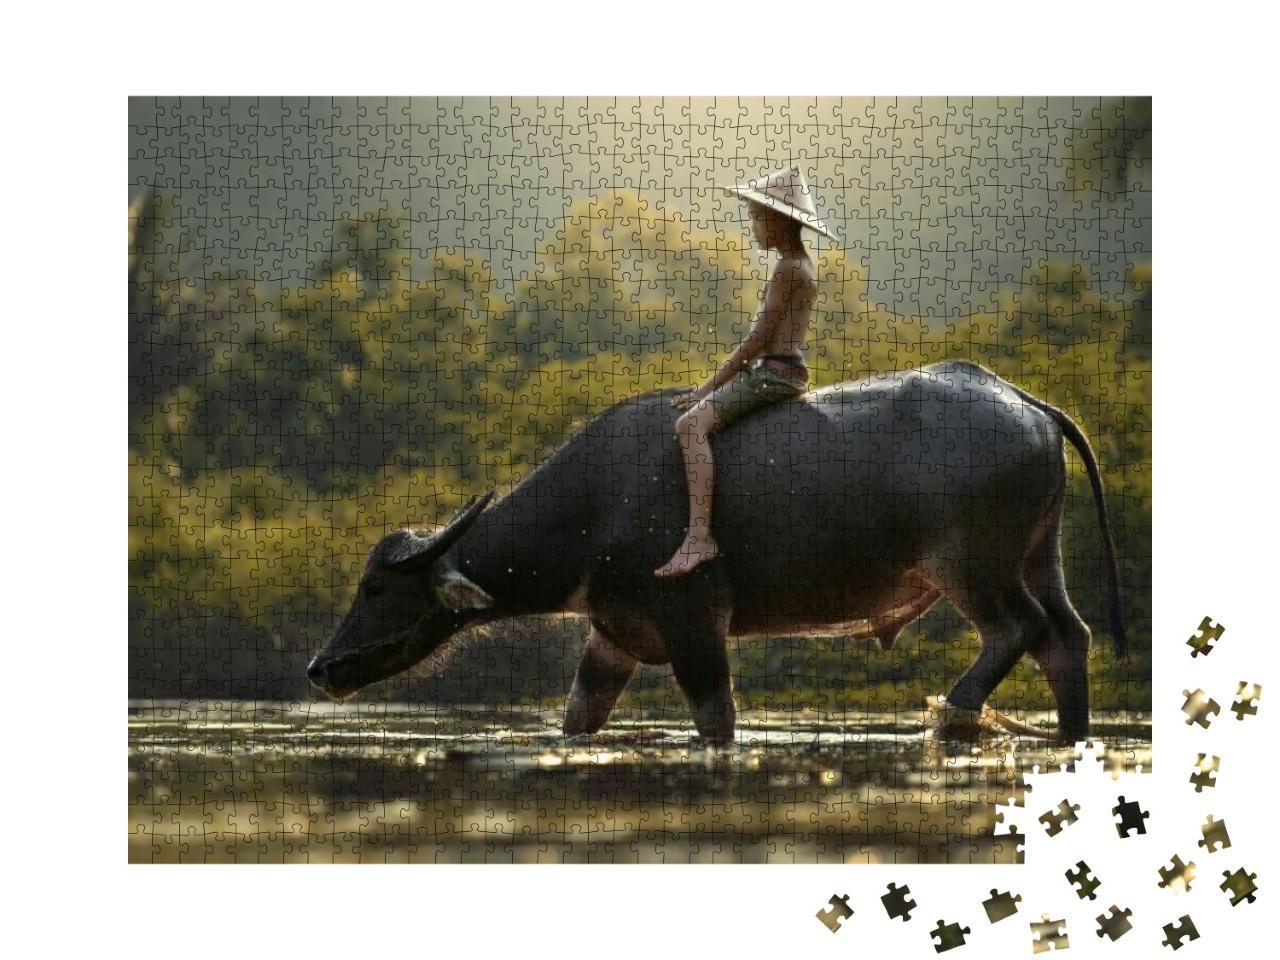 People Cambodia & Water Buffalo... Jigsaw Puzzle with 1000 pieces